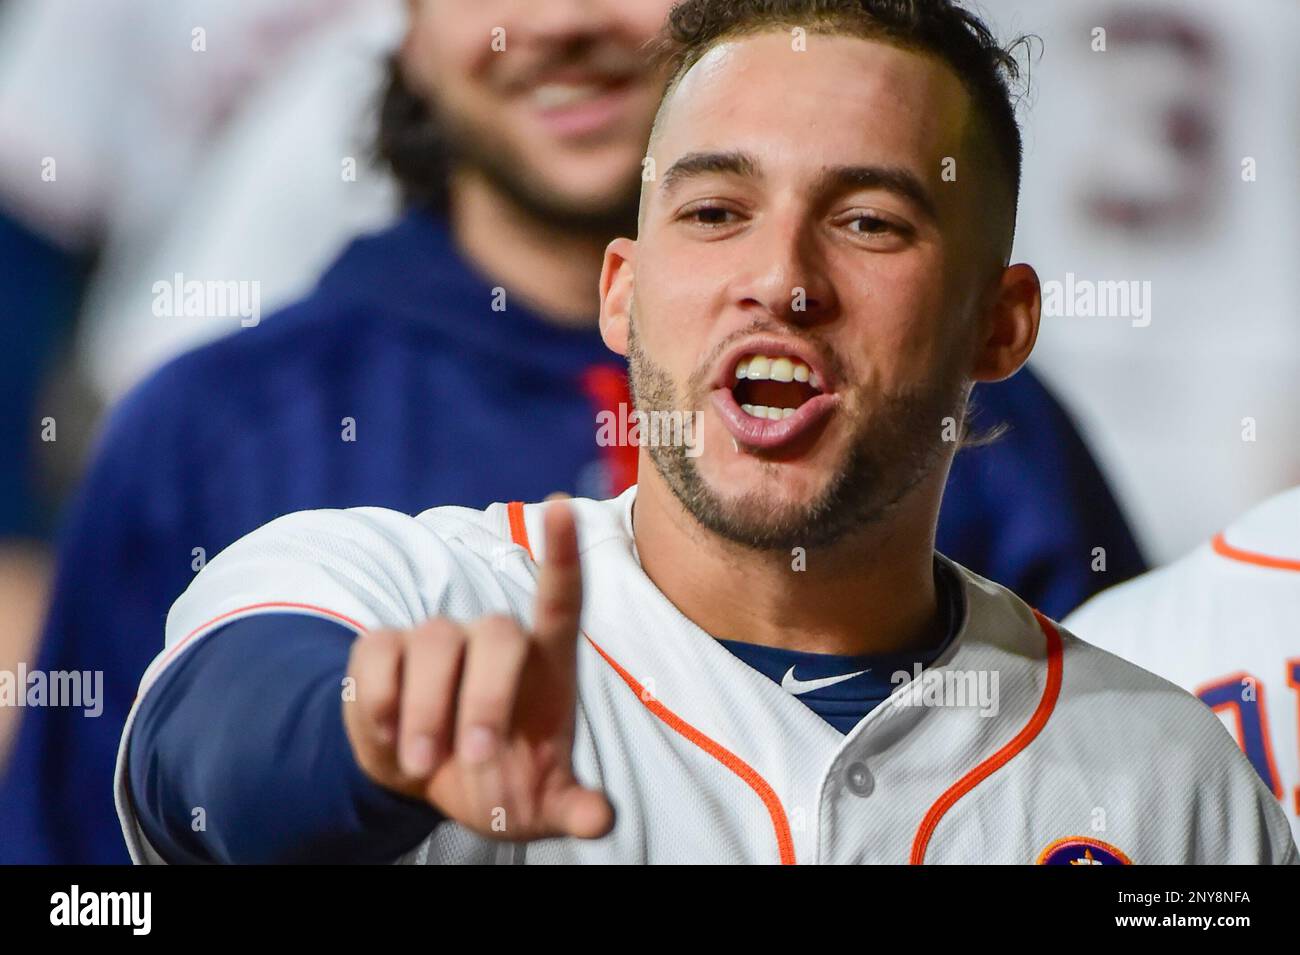 HOUSTON, TX - SEPTEMBER 20: Houston Astros center fielder George Springer's  (4) haircut during the MLB game between the Chicago White Sox and Houston  Astros on September 20, 2017 at Minute Maid